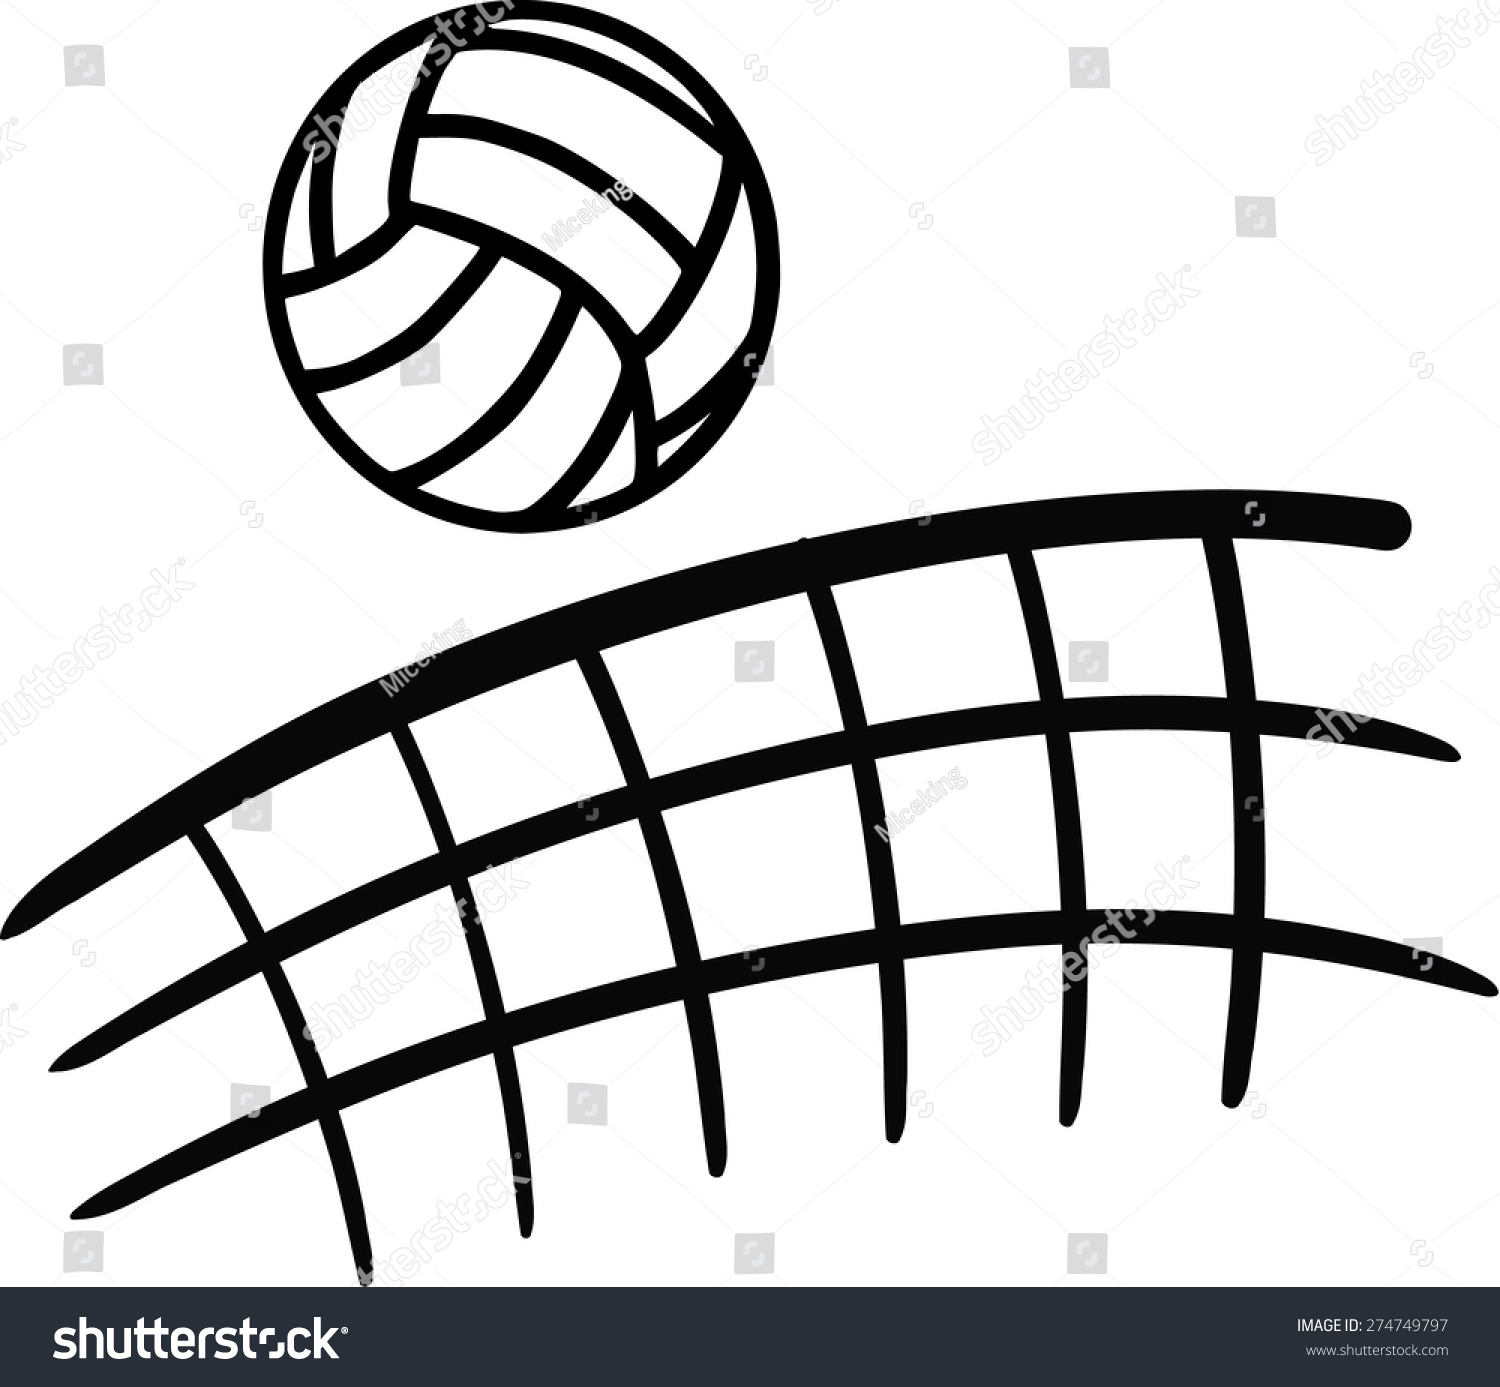 clipart volleyball net - photo #22